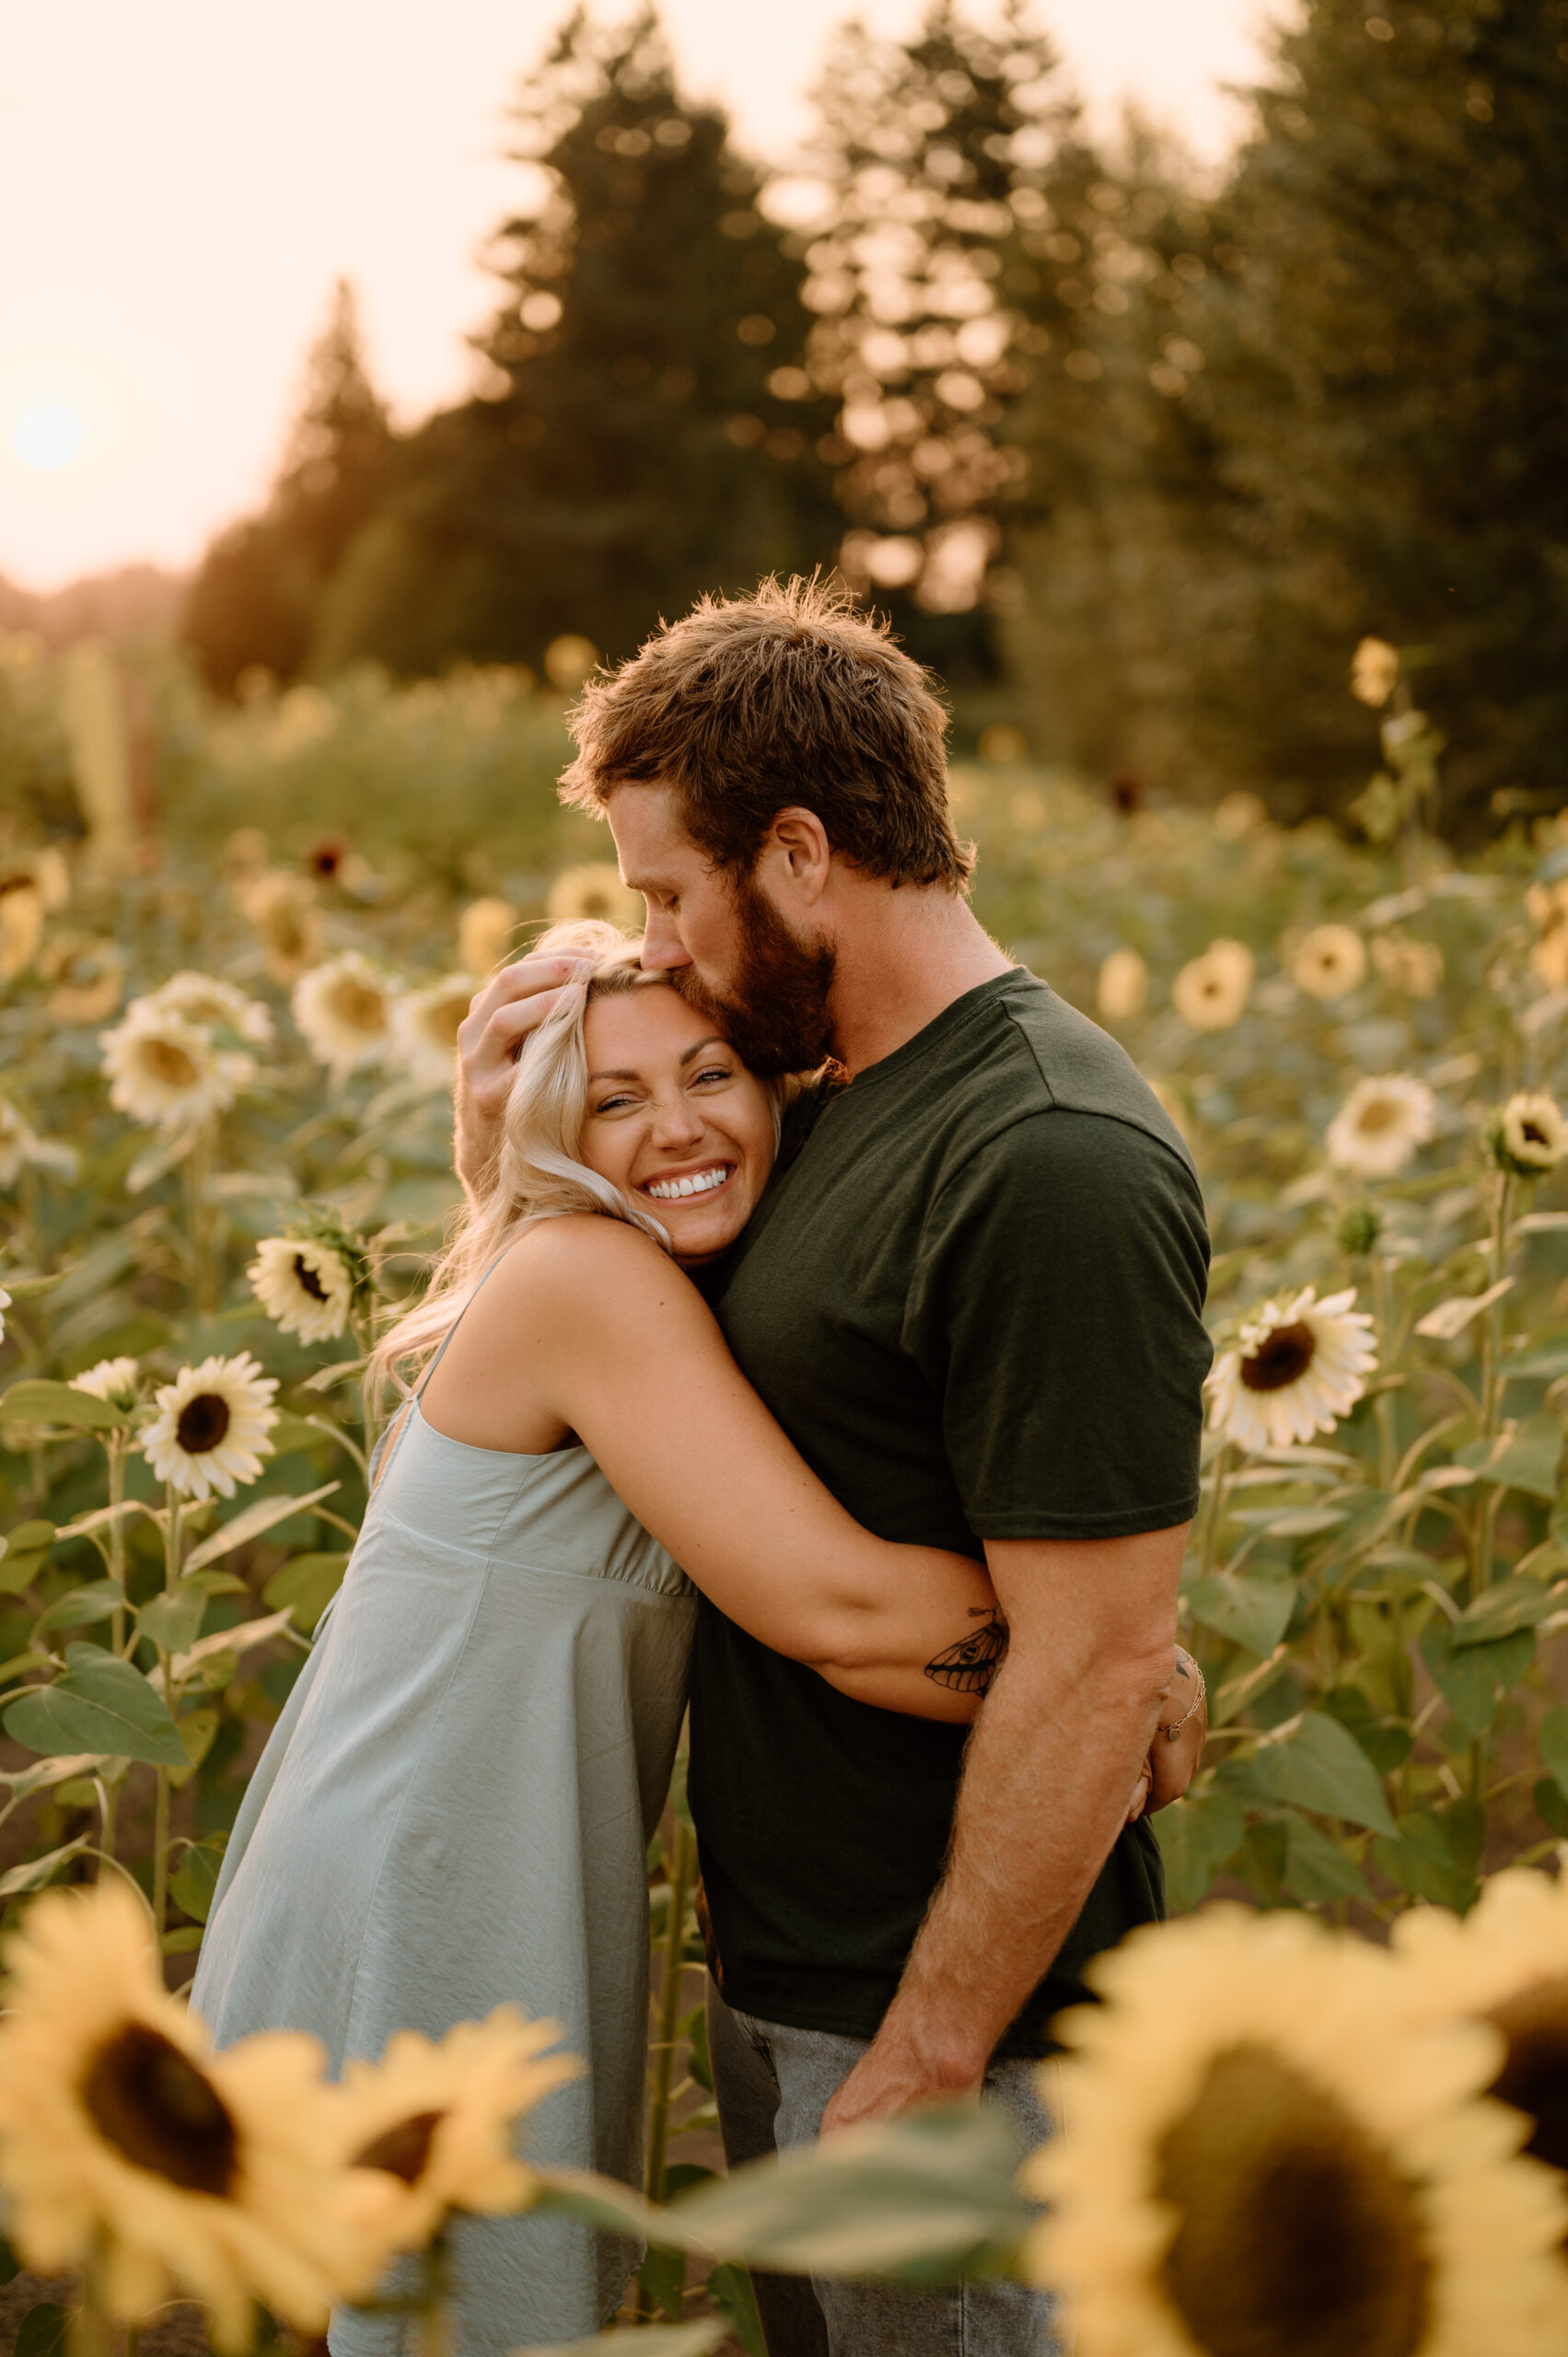 Washington Family Photographer, Summer Photography, Sunflowers, family of three, golden hour, Family Fashion, family portraits with a dog.